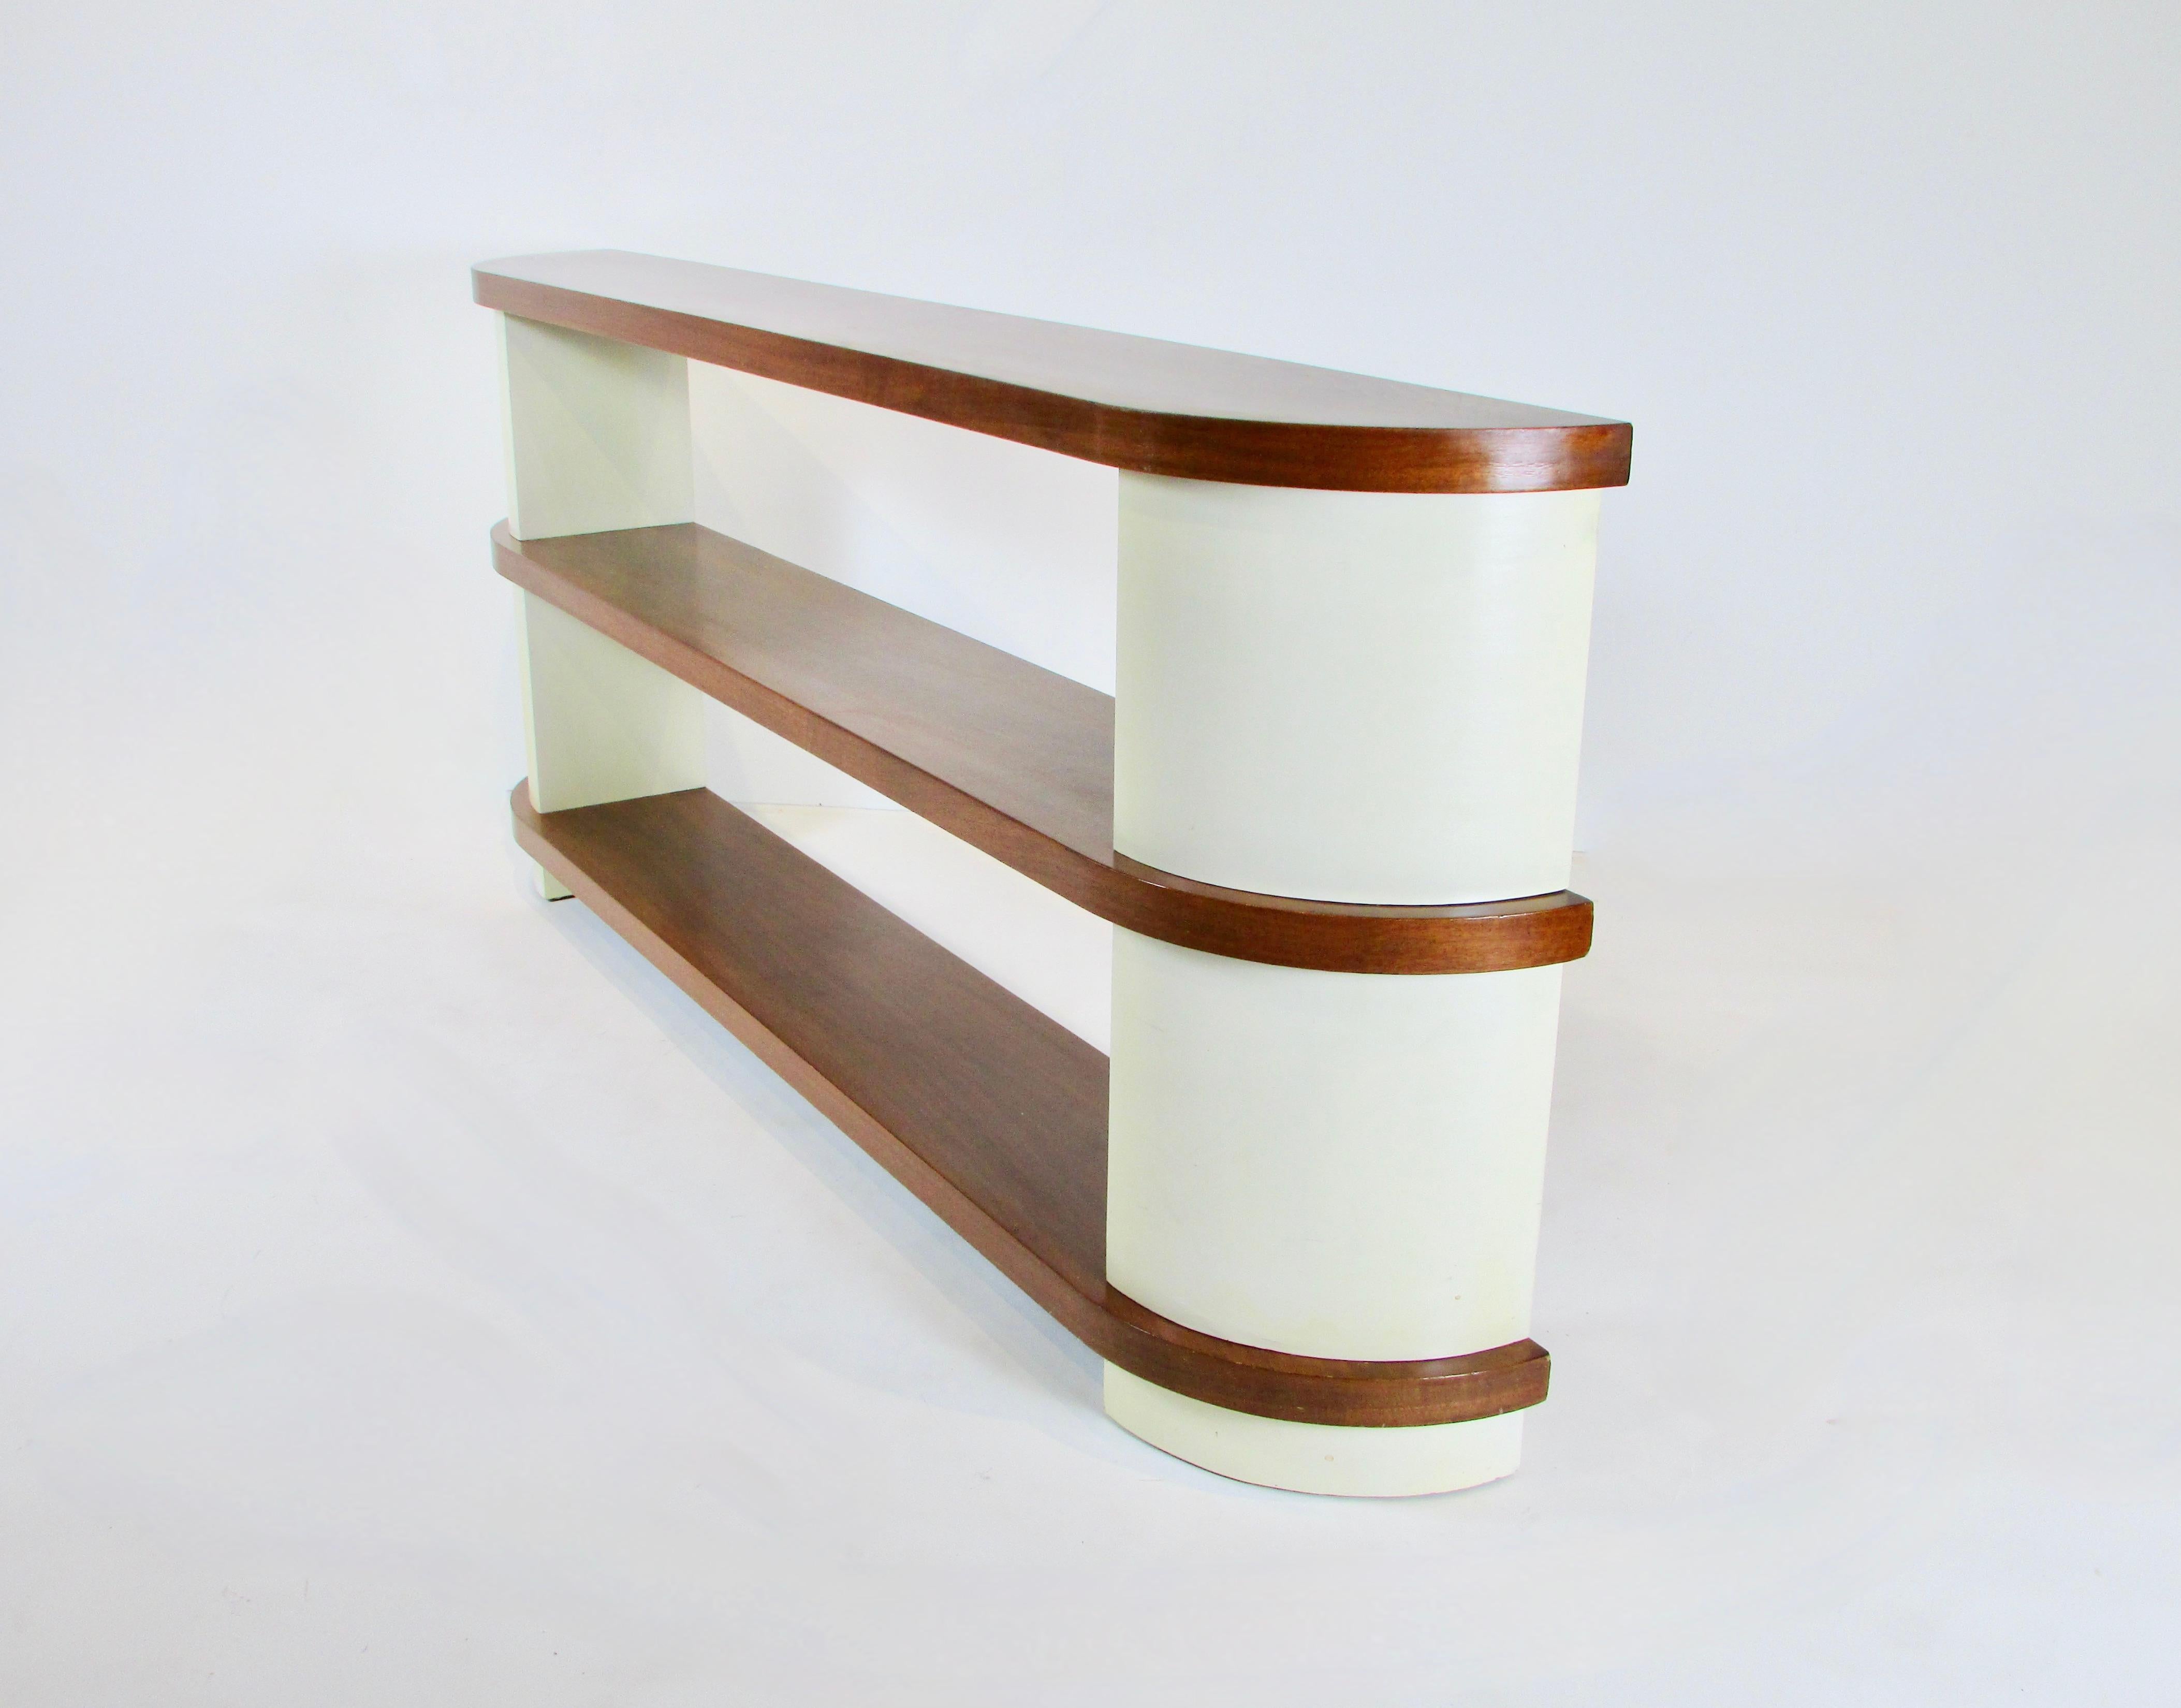 American Donald Deskey Attributed Art Deco Streamlined Moderne Console Entry Shelf Unit For Sale